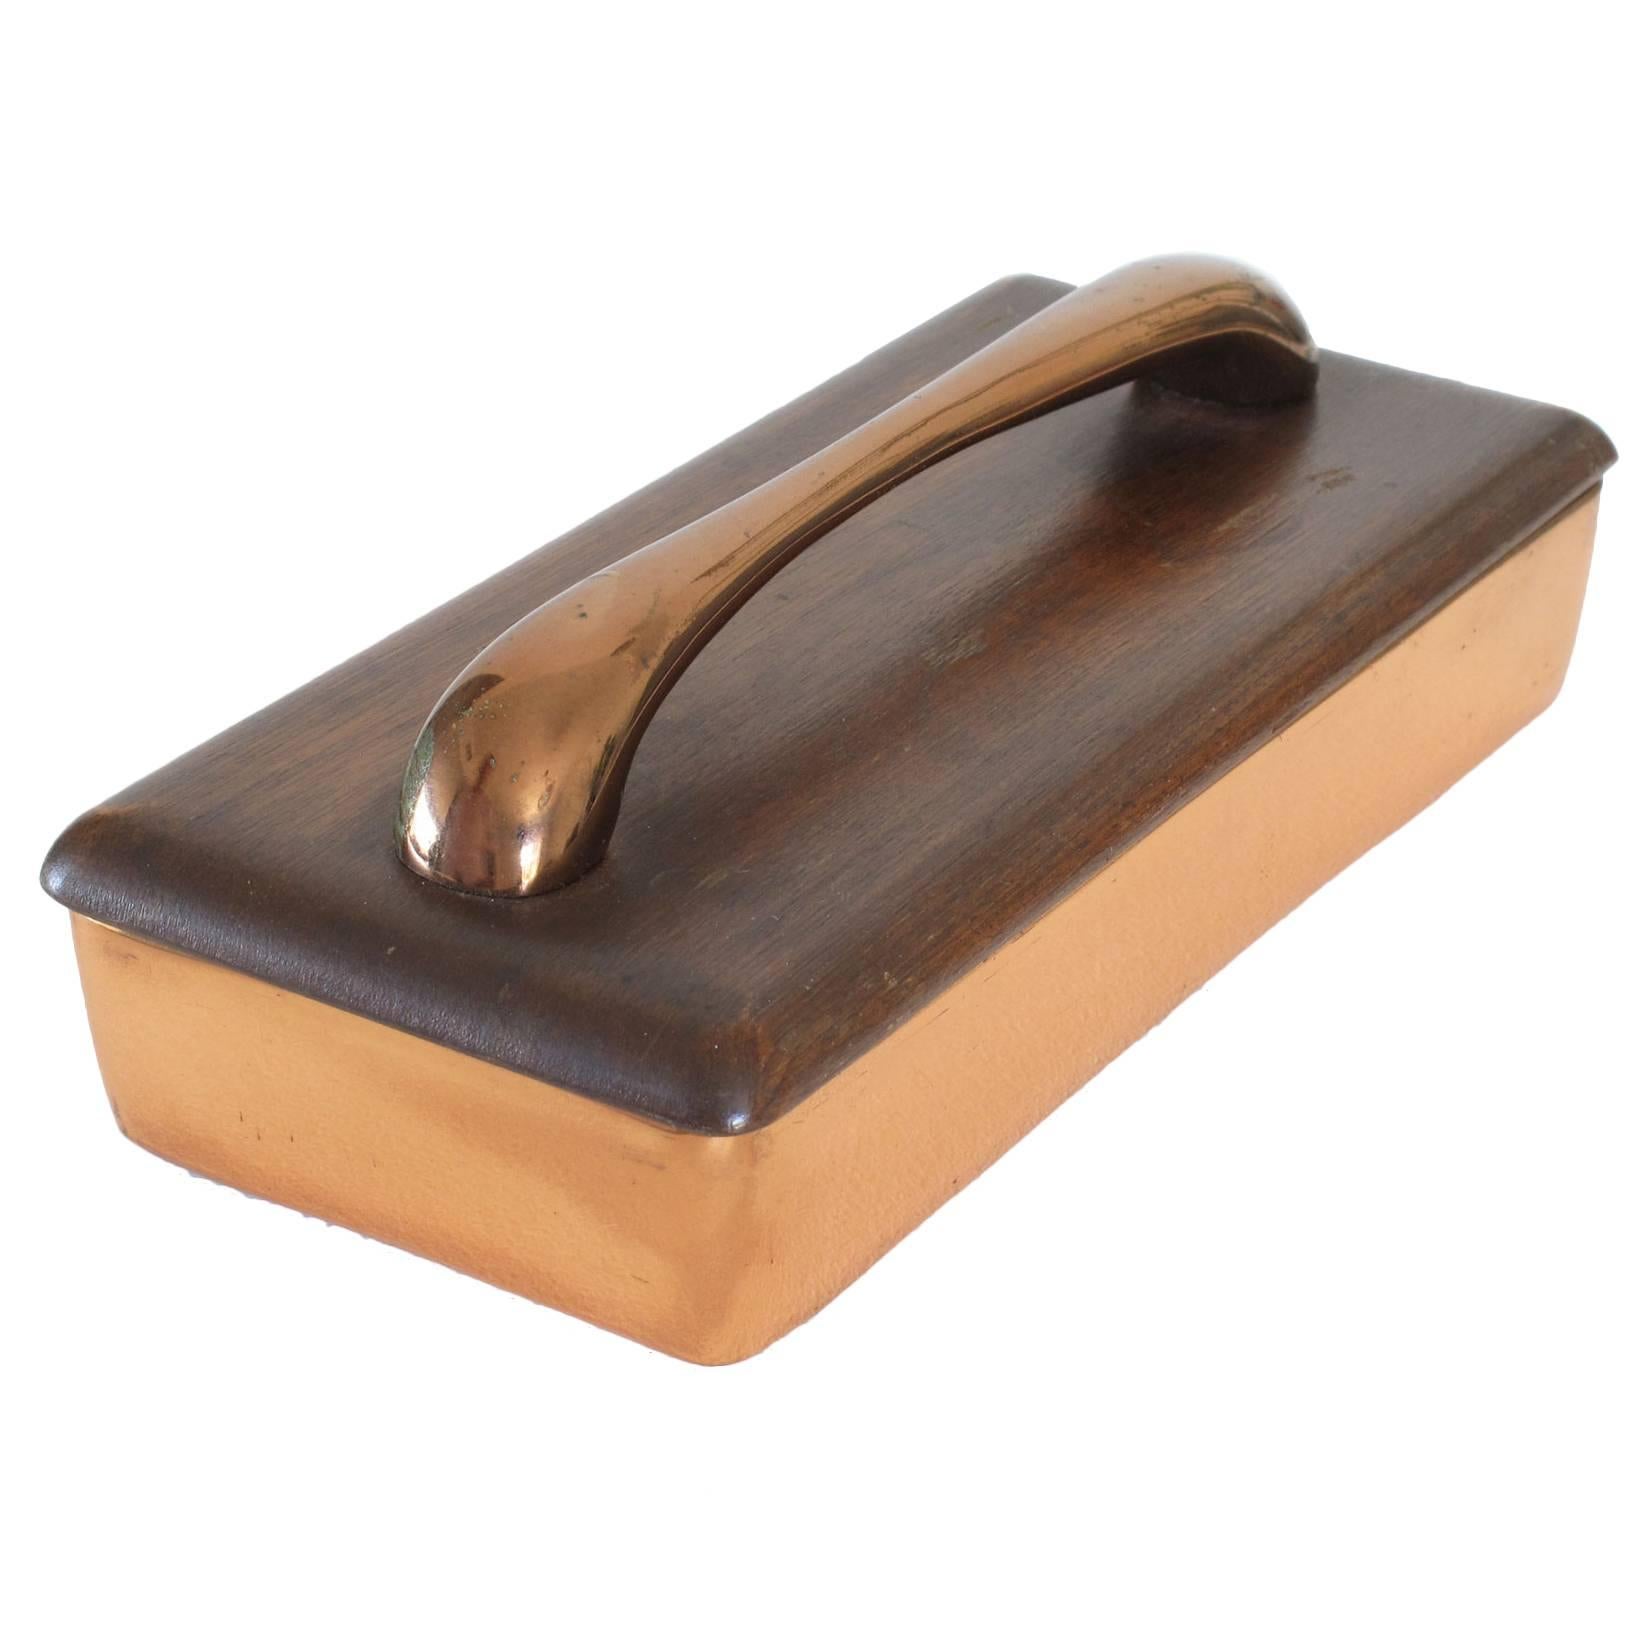 Ben Seibel Copper Box with Wood Lid and Copper Handle, 1950s For Sale